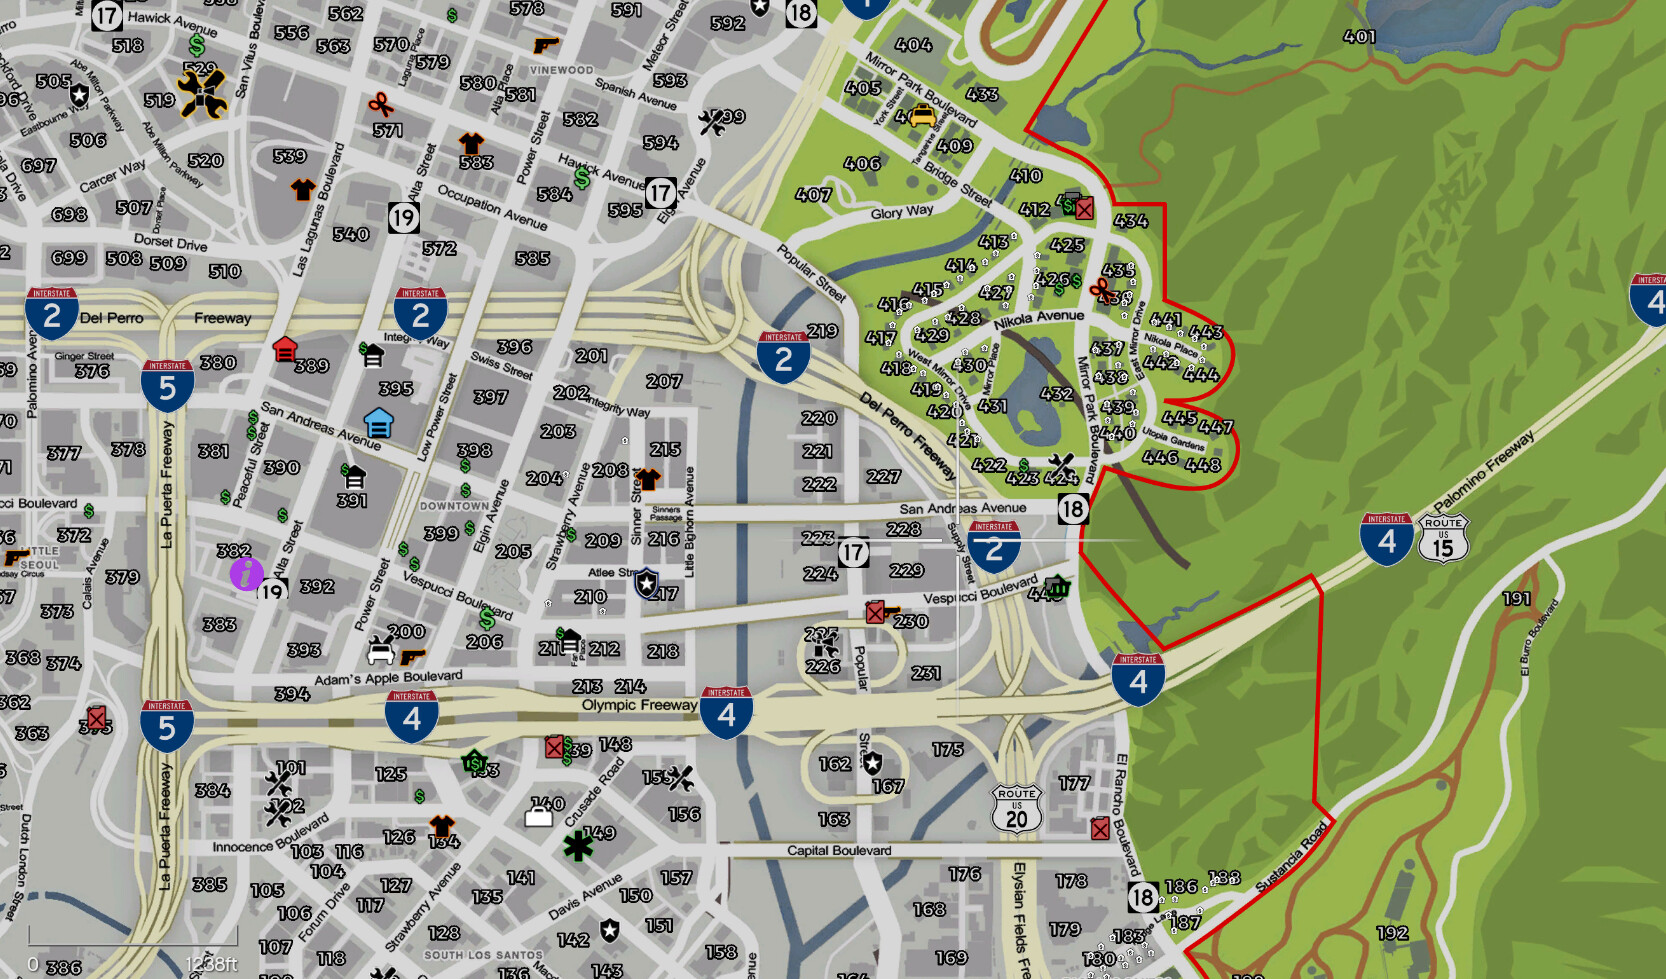 SP/FIVEM DOJRP Styled Map With Street Names and Addresses - Visuals & Data  FIle Modifications 